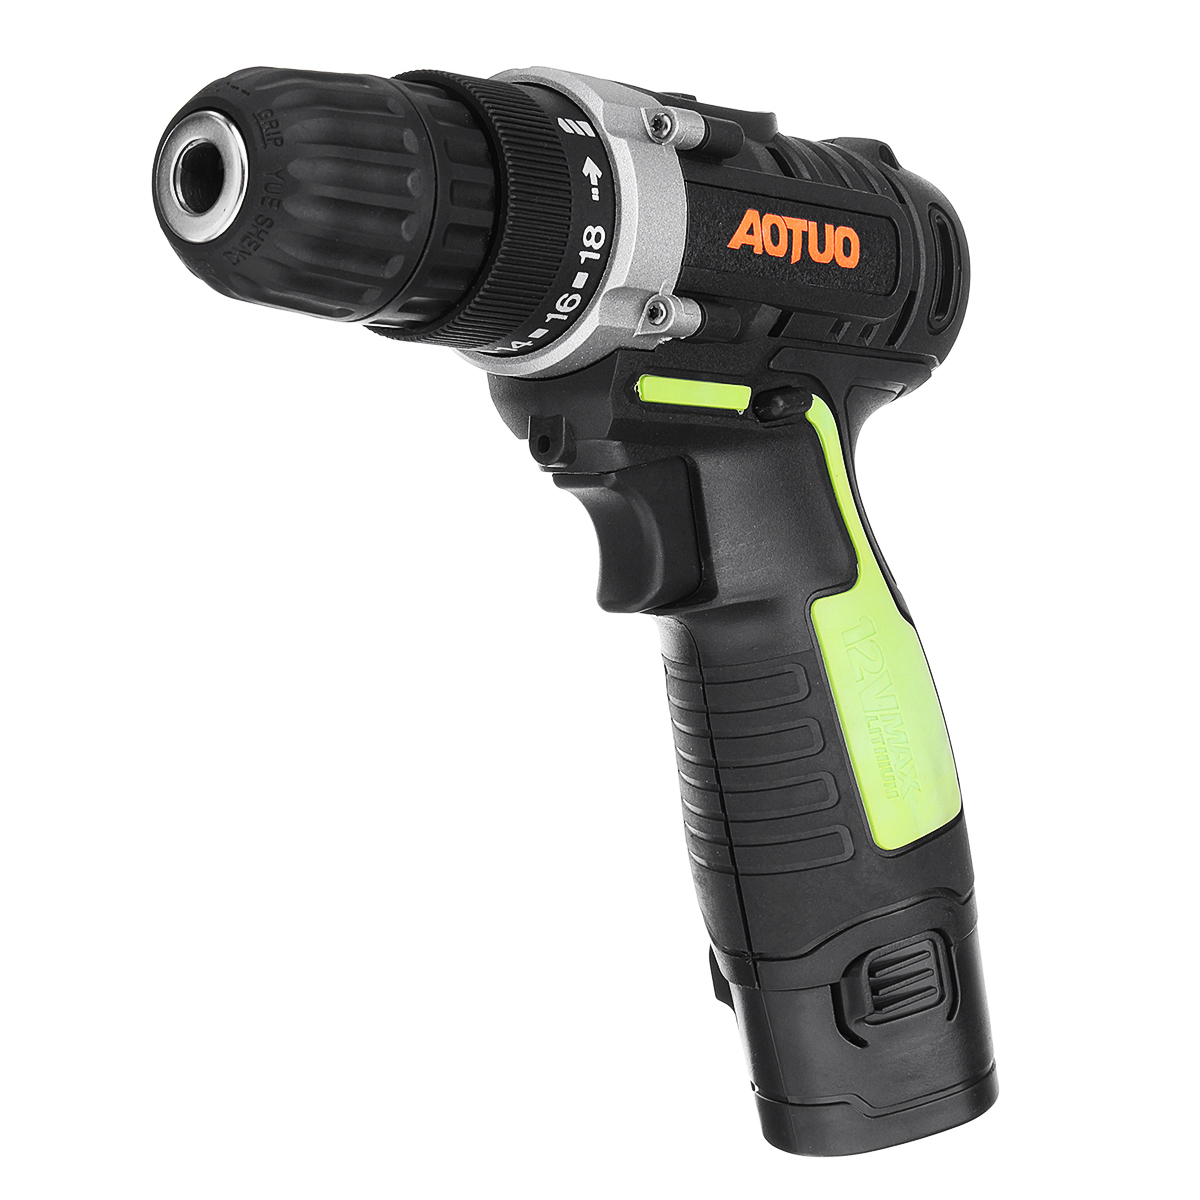 

AOTUO 12V Li-Ion Cordless Power Drills Driver Rechargeable Screwdriver 2 Speed LED light